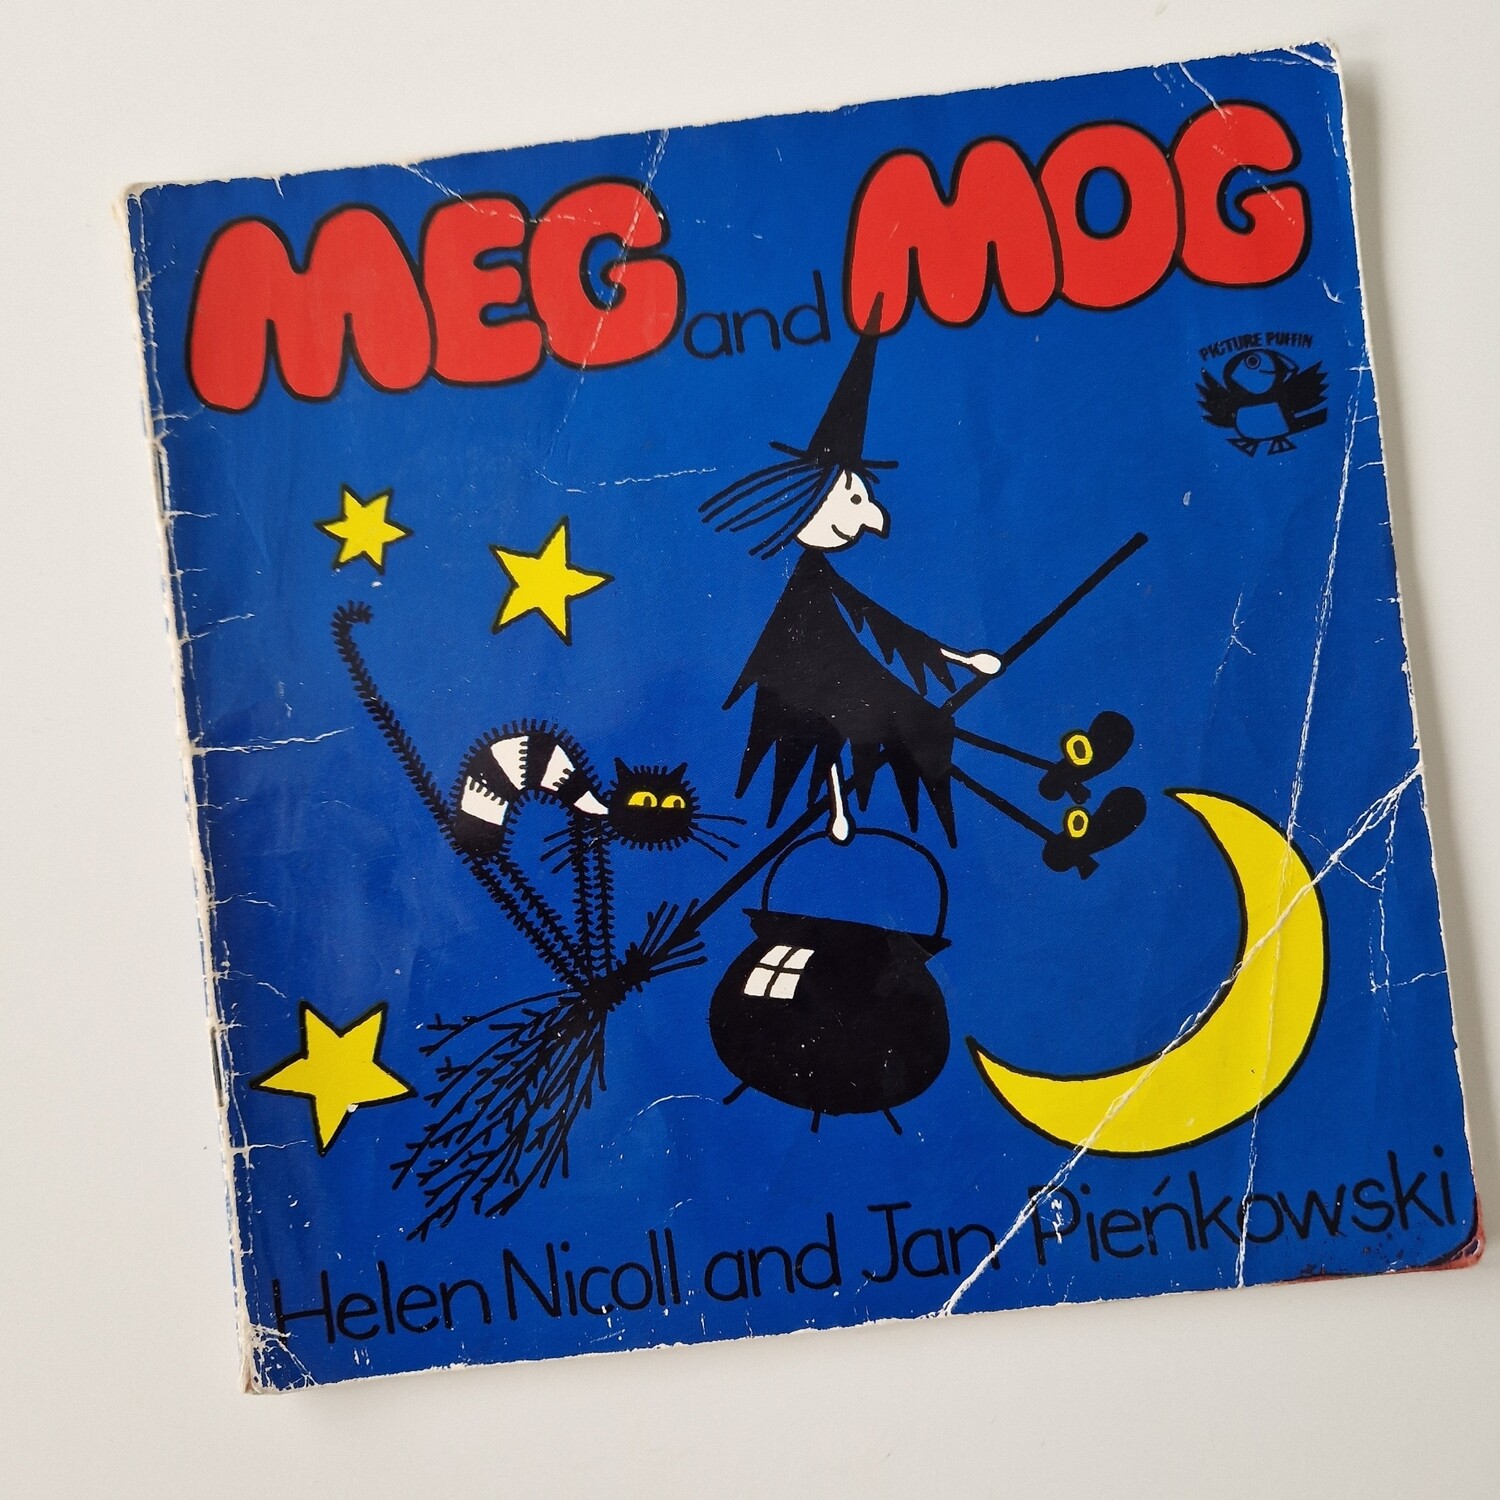 Meg and Mog Notebook - made from a paperback book